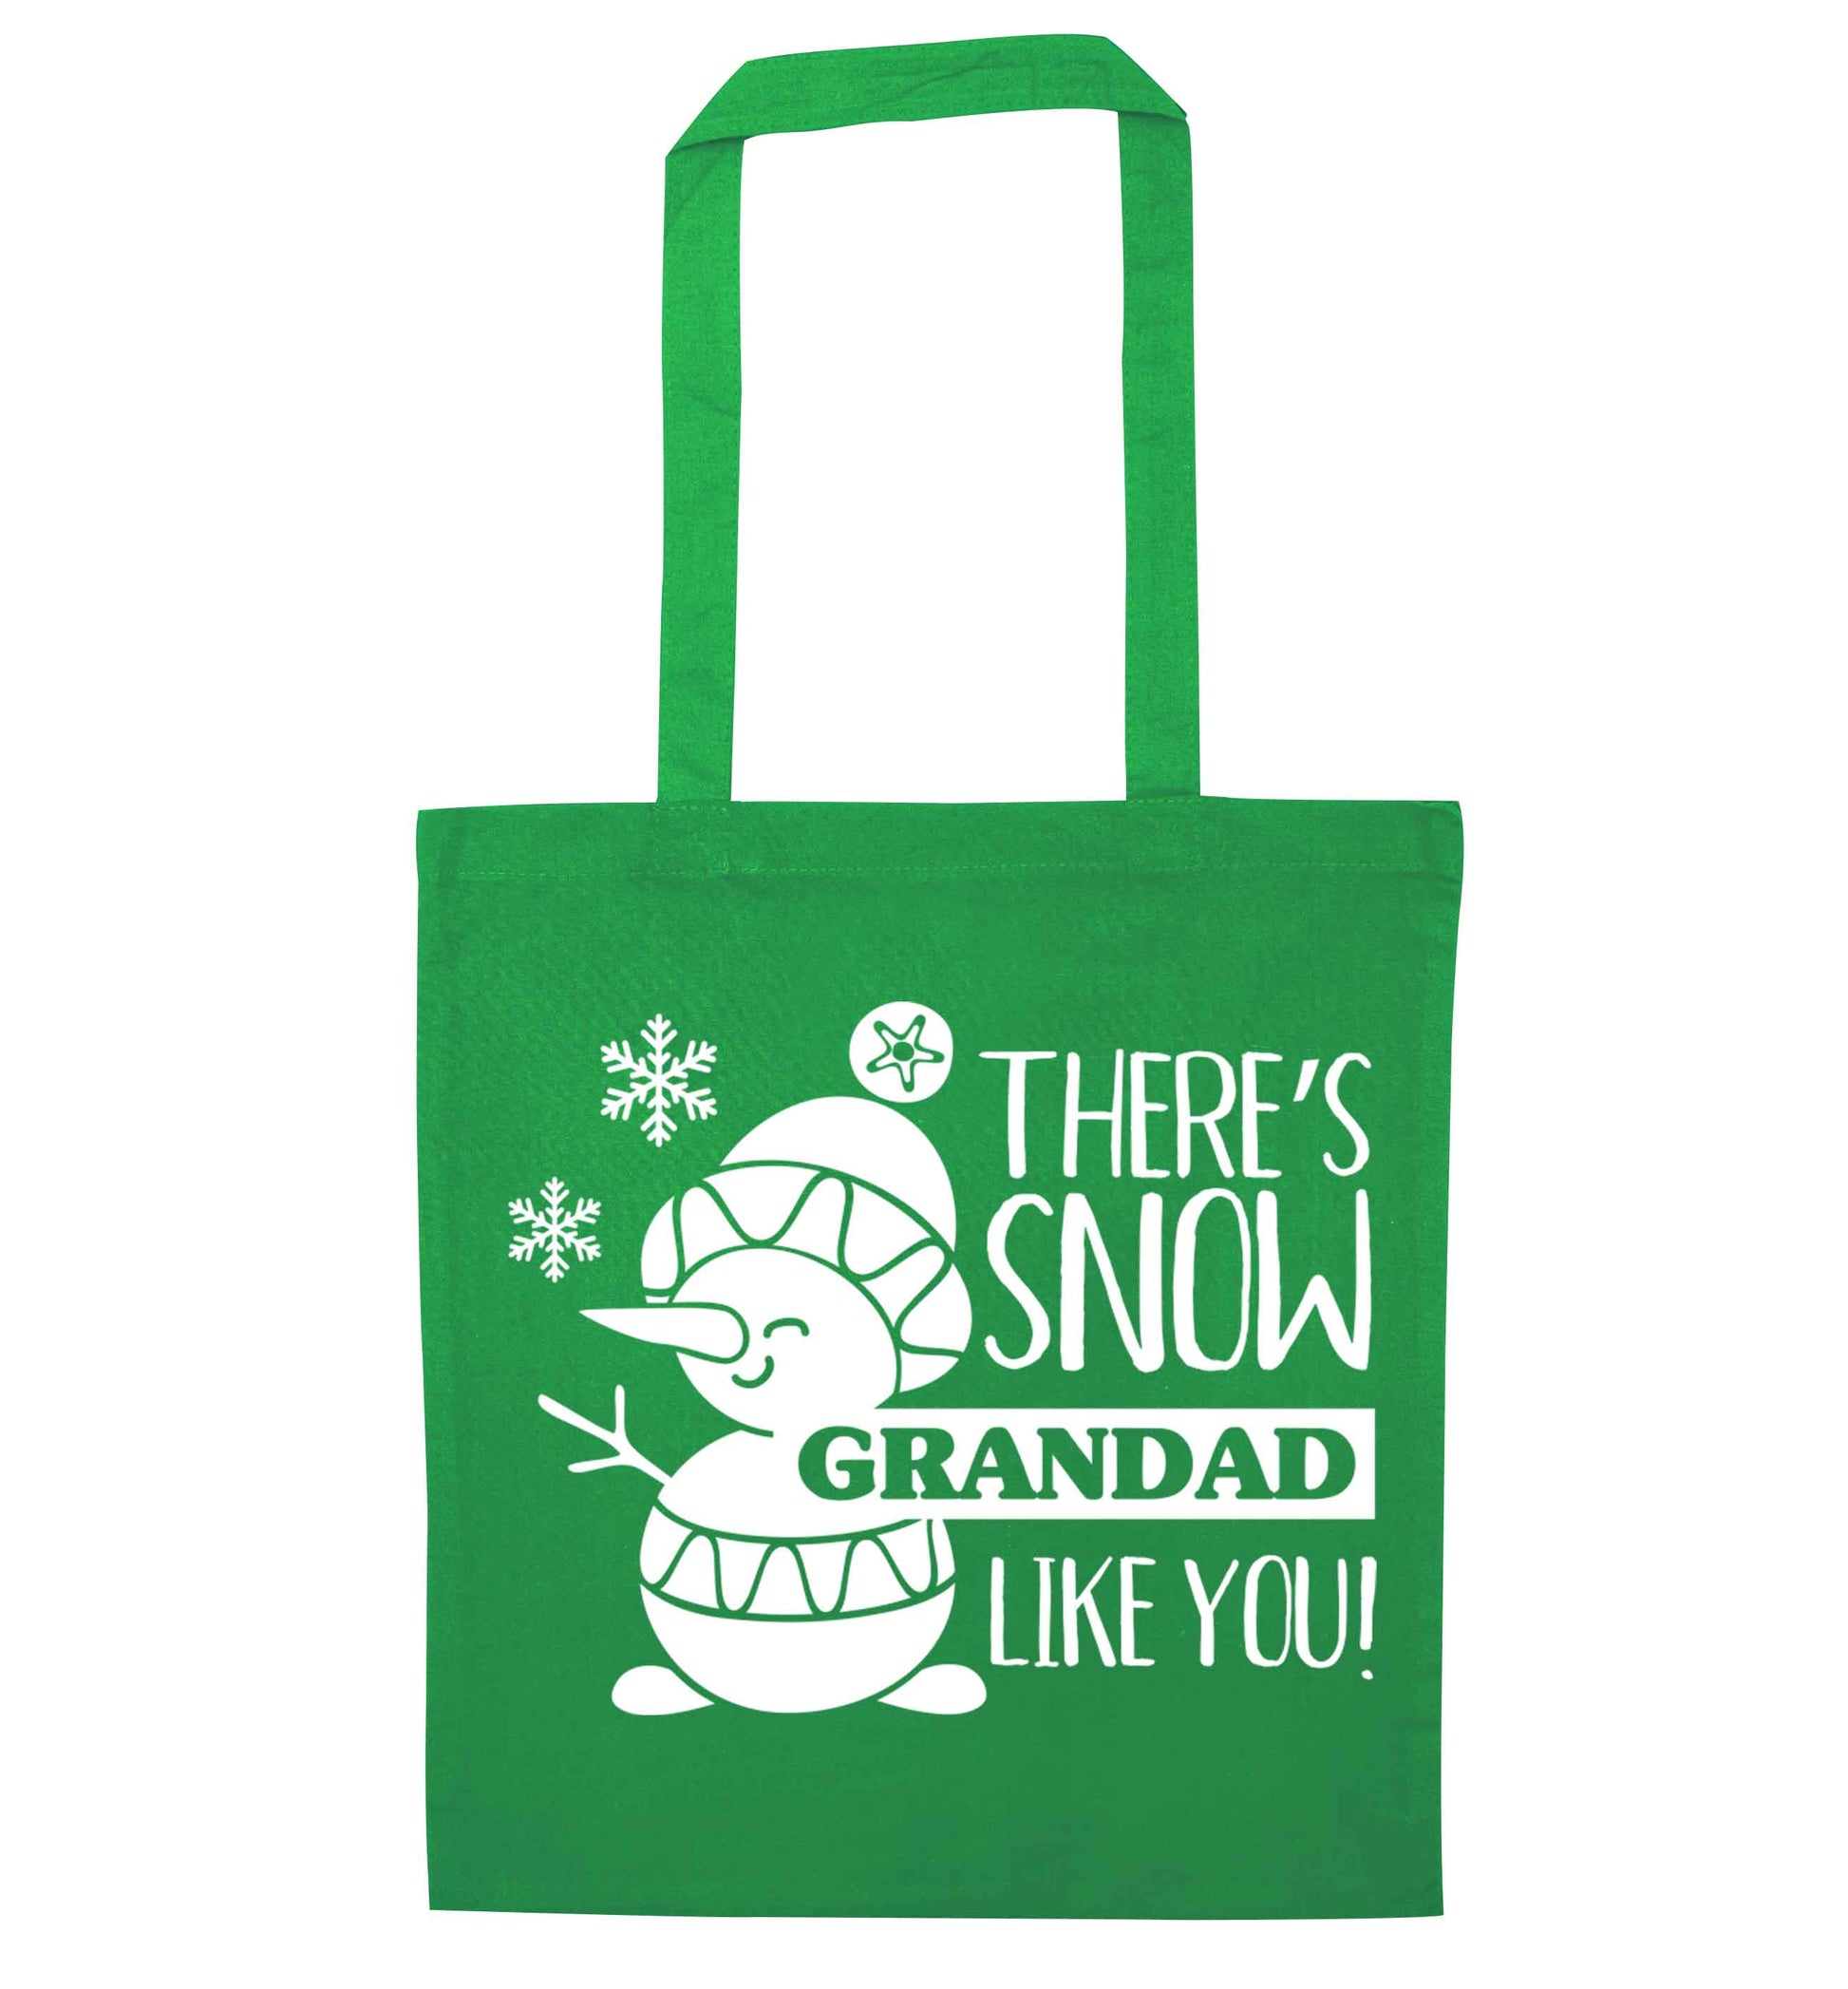 There's snow grandad like you green tote bag